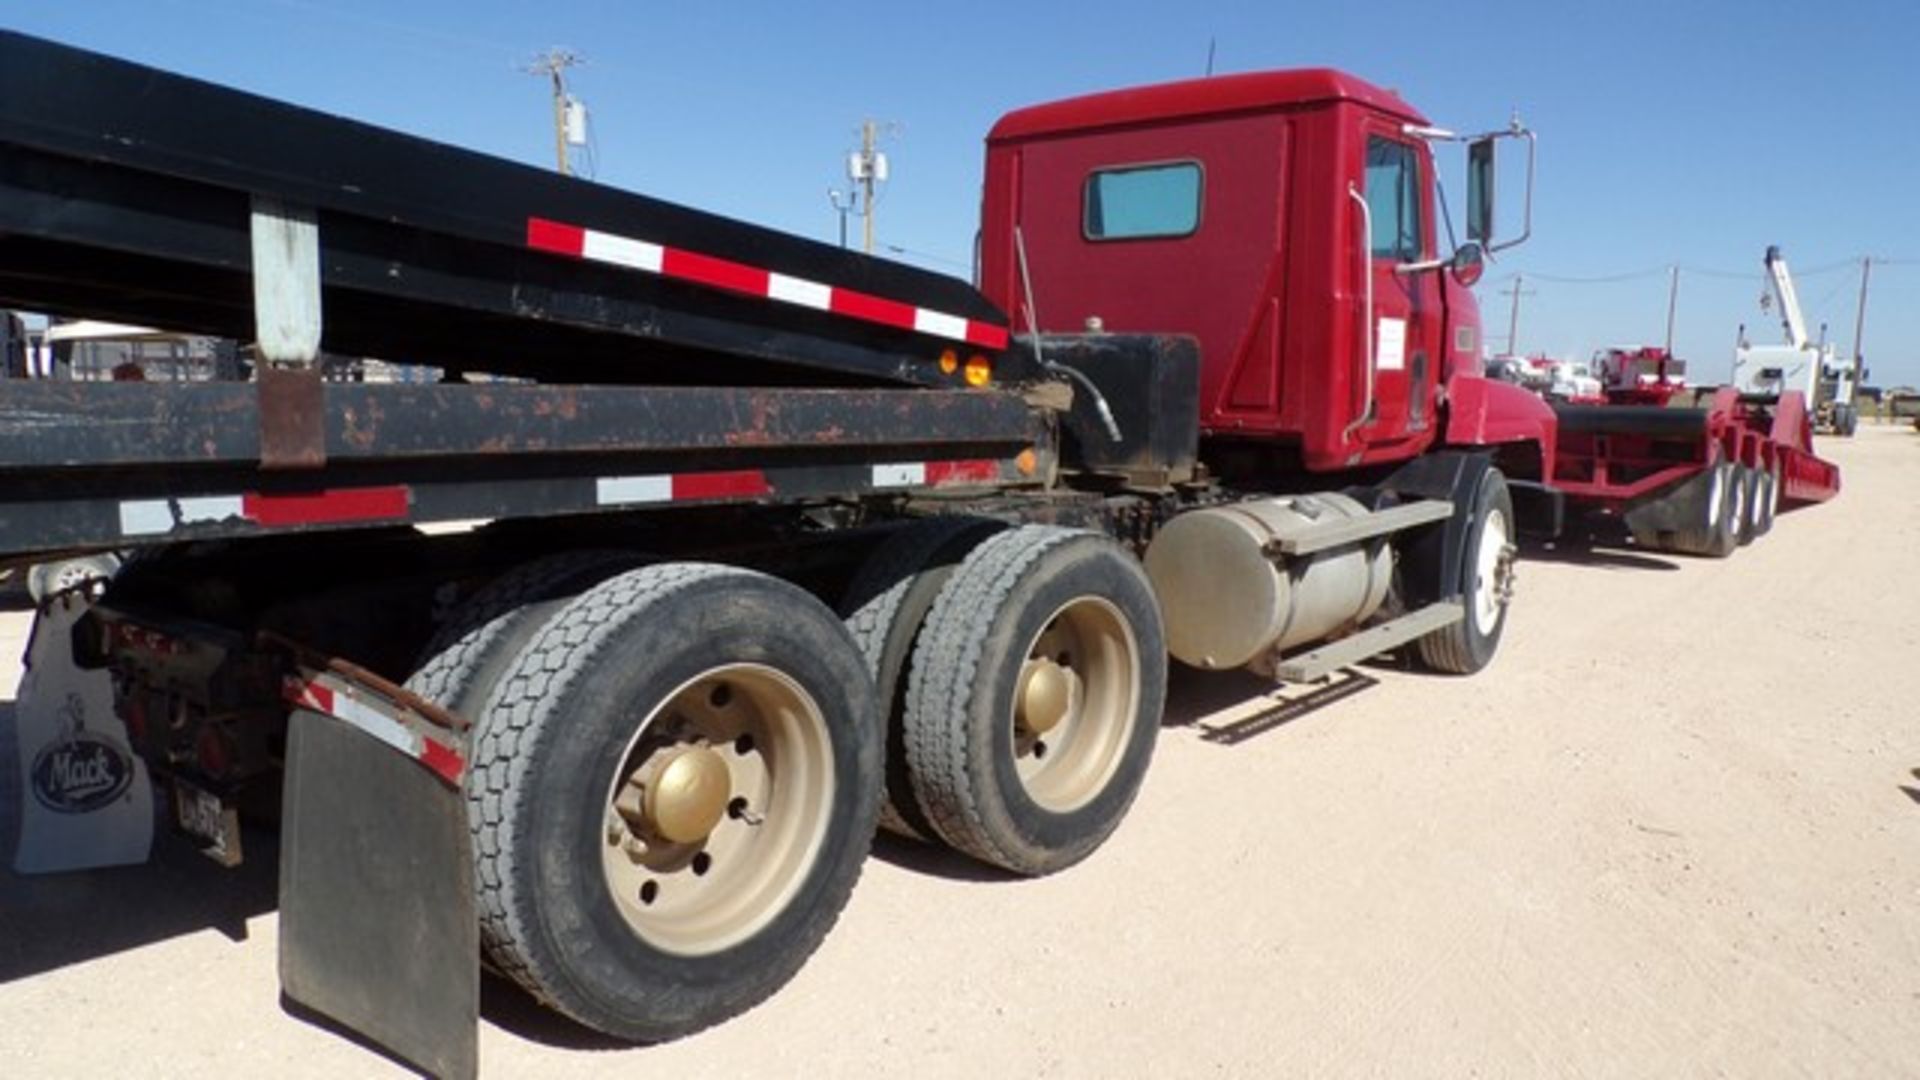 Located in YARD 1 - Midland, TX (6339) 1996 MACK CH613 T/A DAY CAB HAUL TRUCK, VIN- - Image 3 of 9